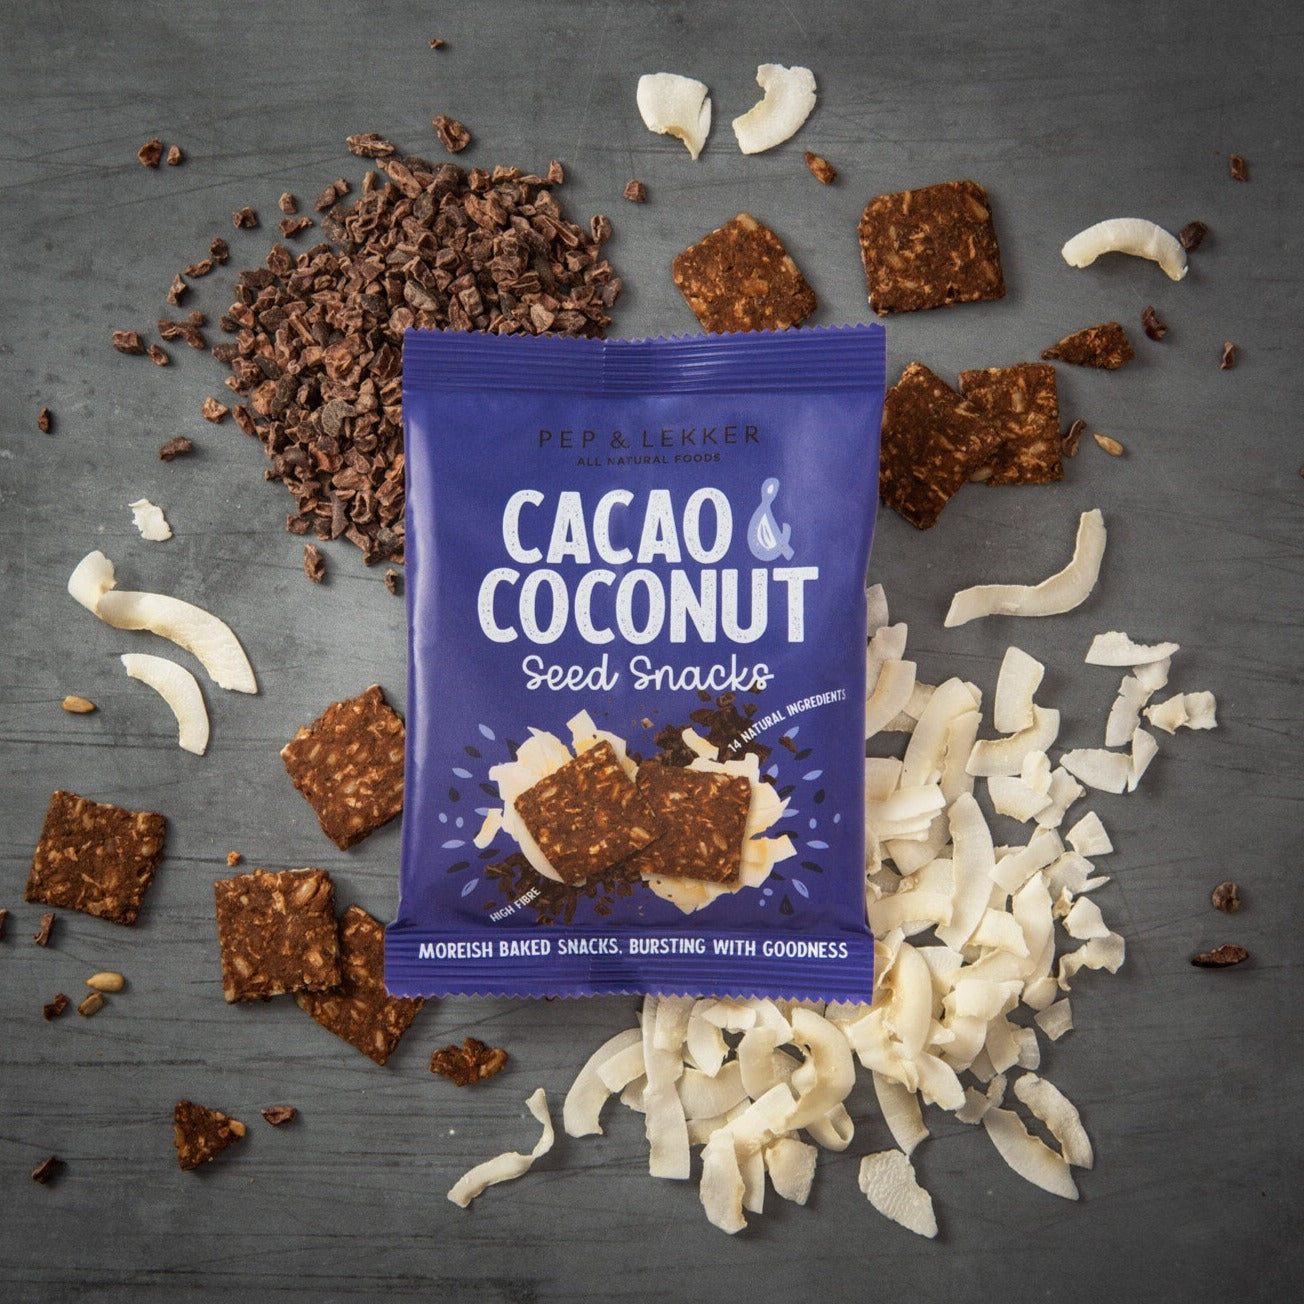 Pep & Lekker Cacao and Coconut seed baked snack. Packed full of fibre and 14 natural ingredients